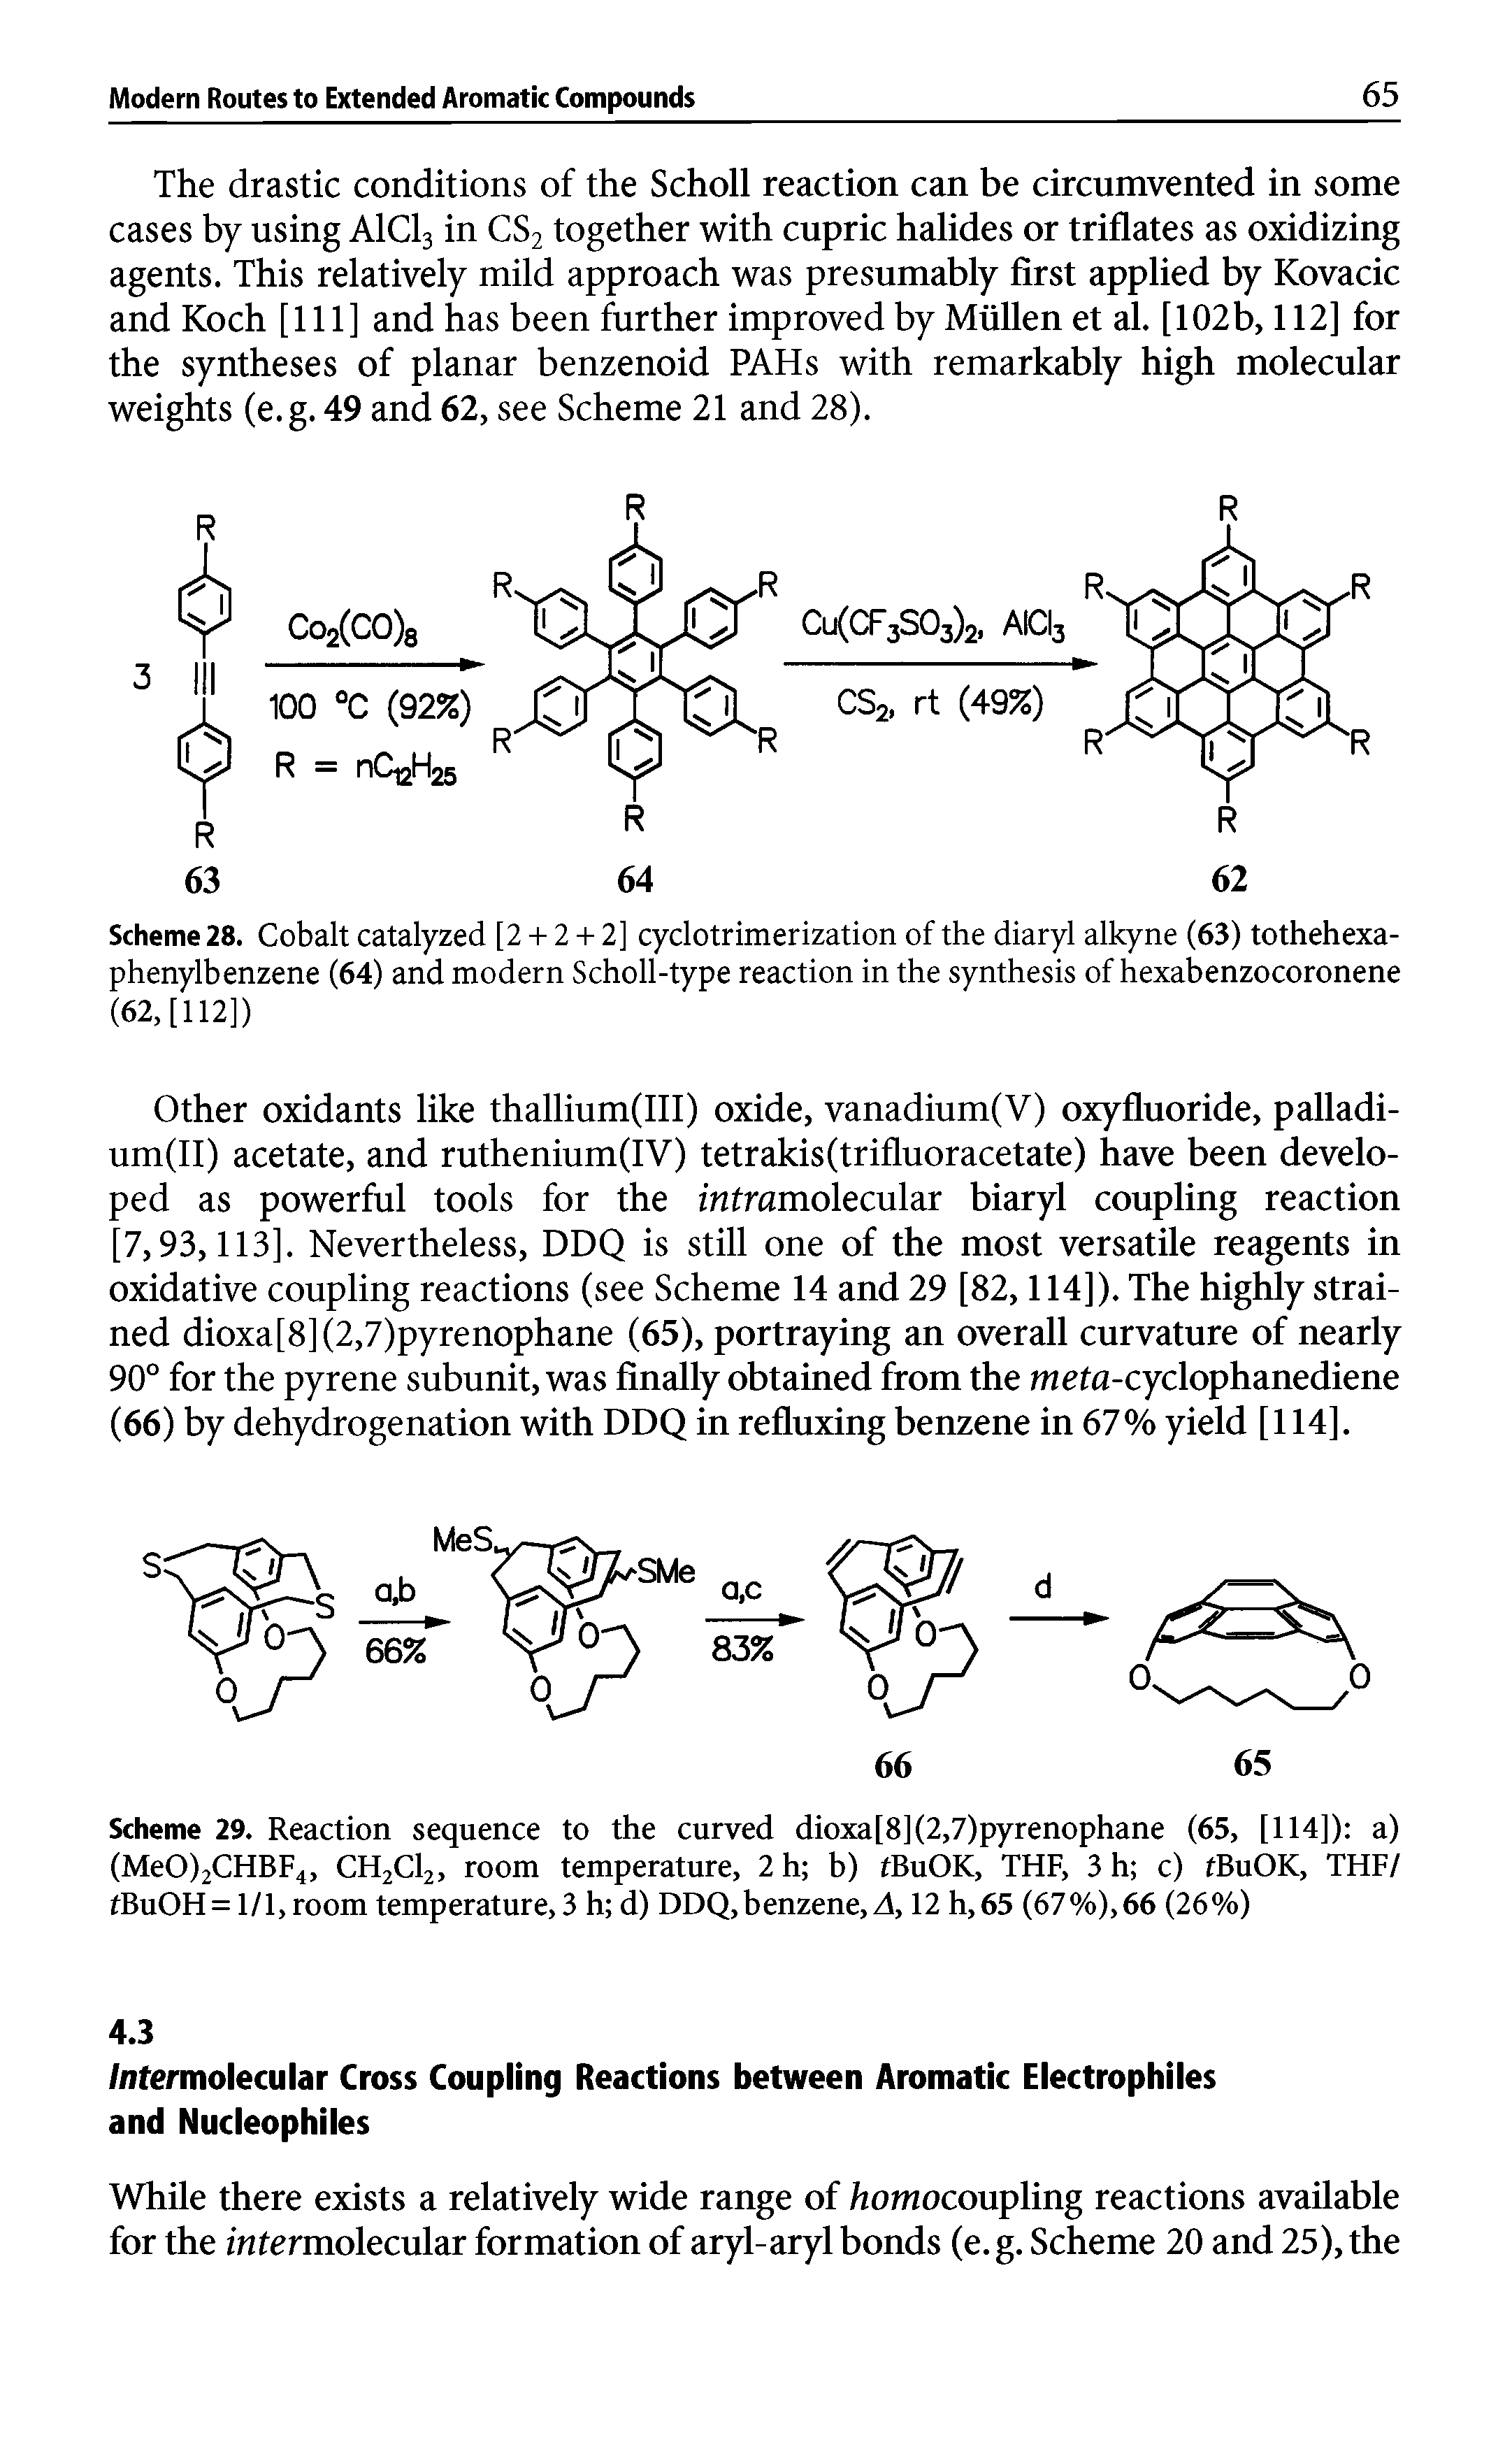 Scheme 28. Cobalt catalyzed [2 + 2 + 2] cyclotrimerization of the diaryl alkyne (63) tothehexa-phenylbenzene (64) and modern Scholl-type reaction in the synthesis of hexabenzocoronene (62,[112])...